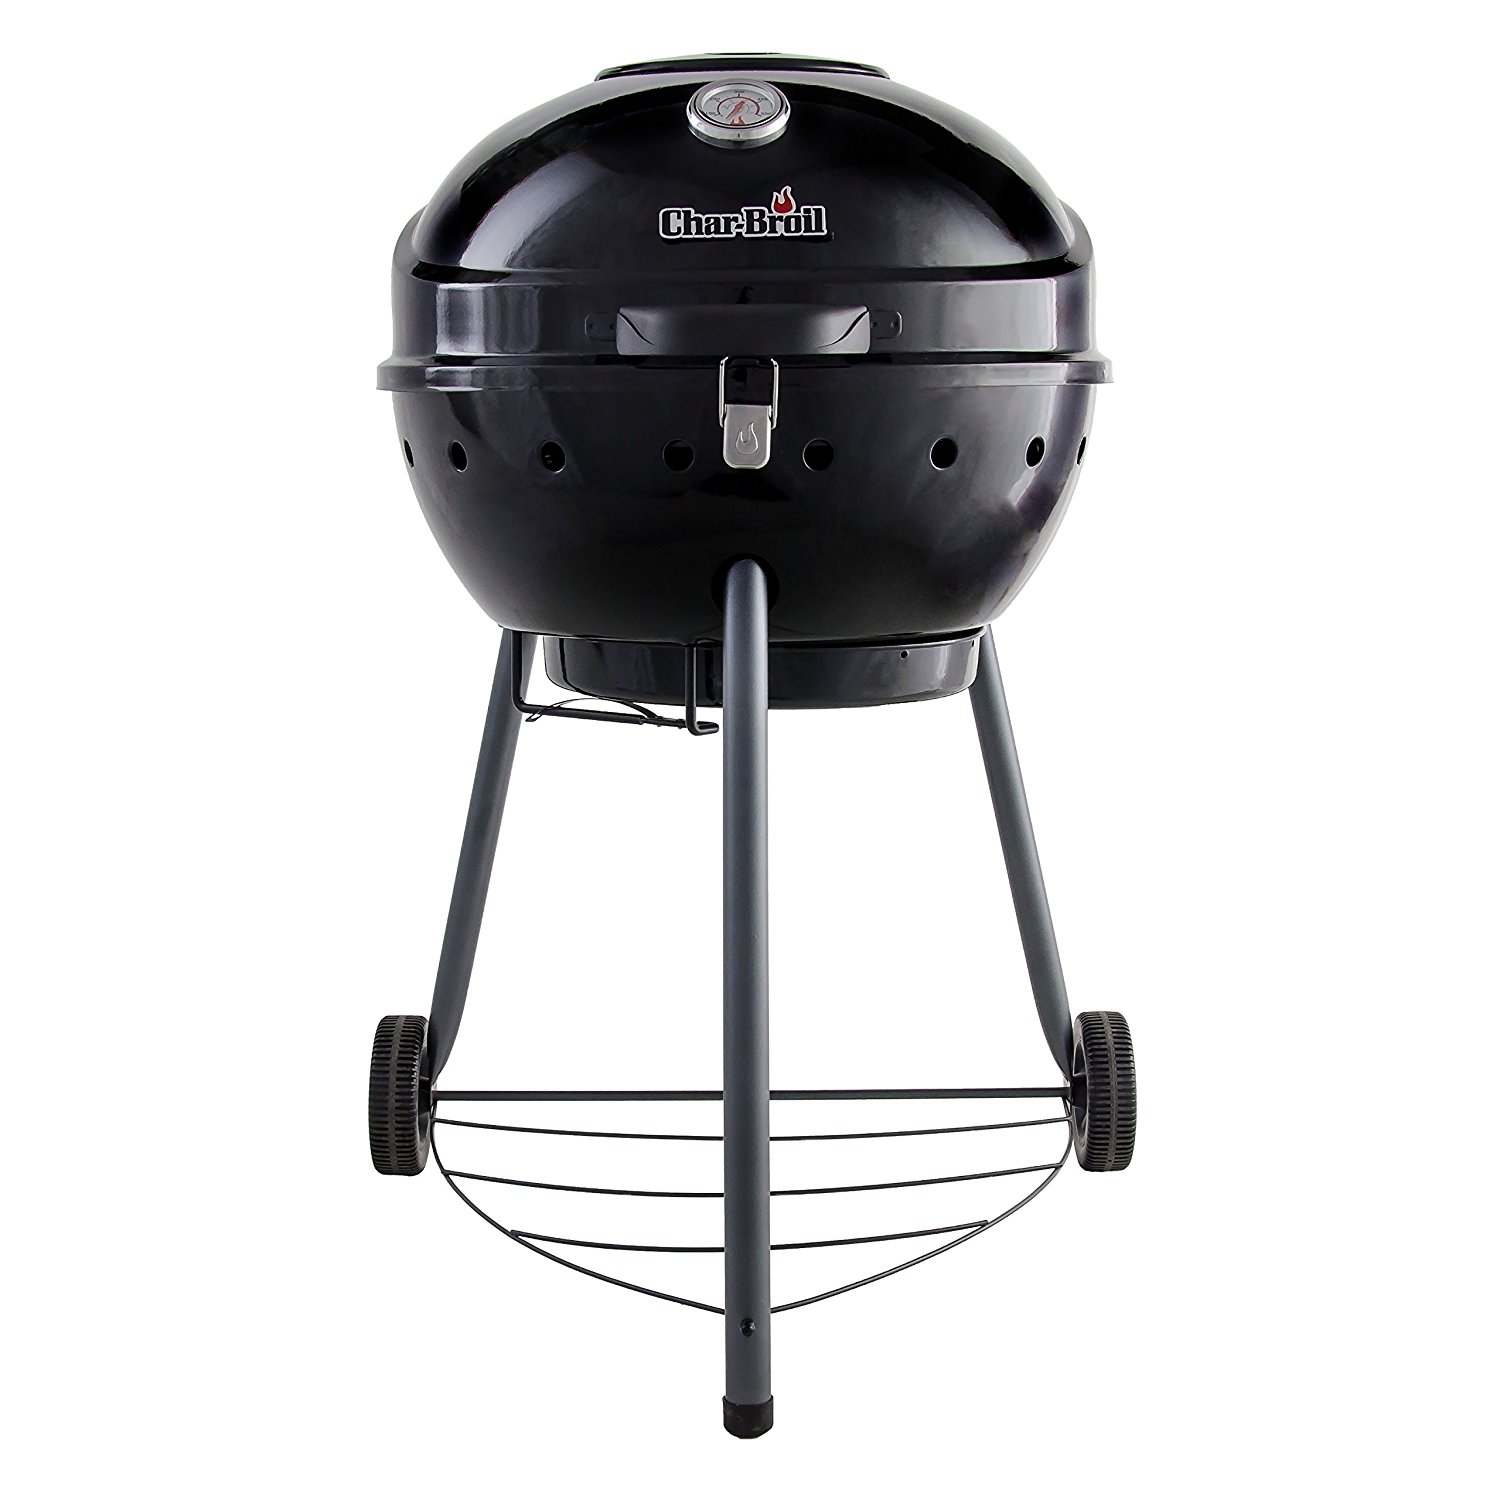 Top 13 Best Charcoal Grill Under $100